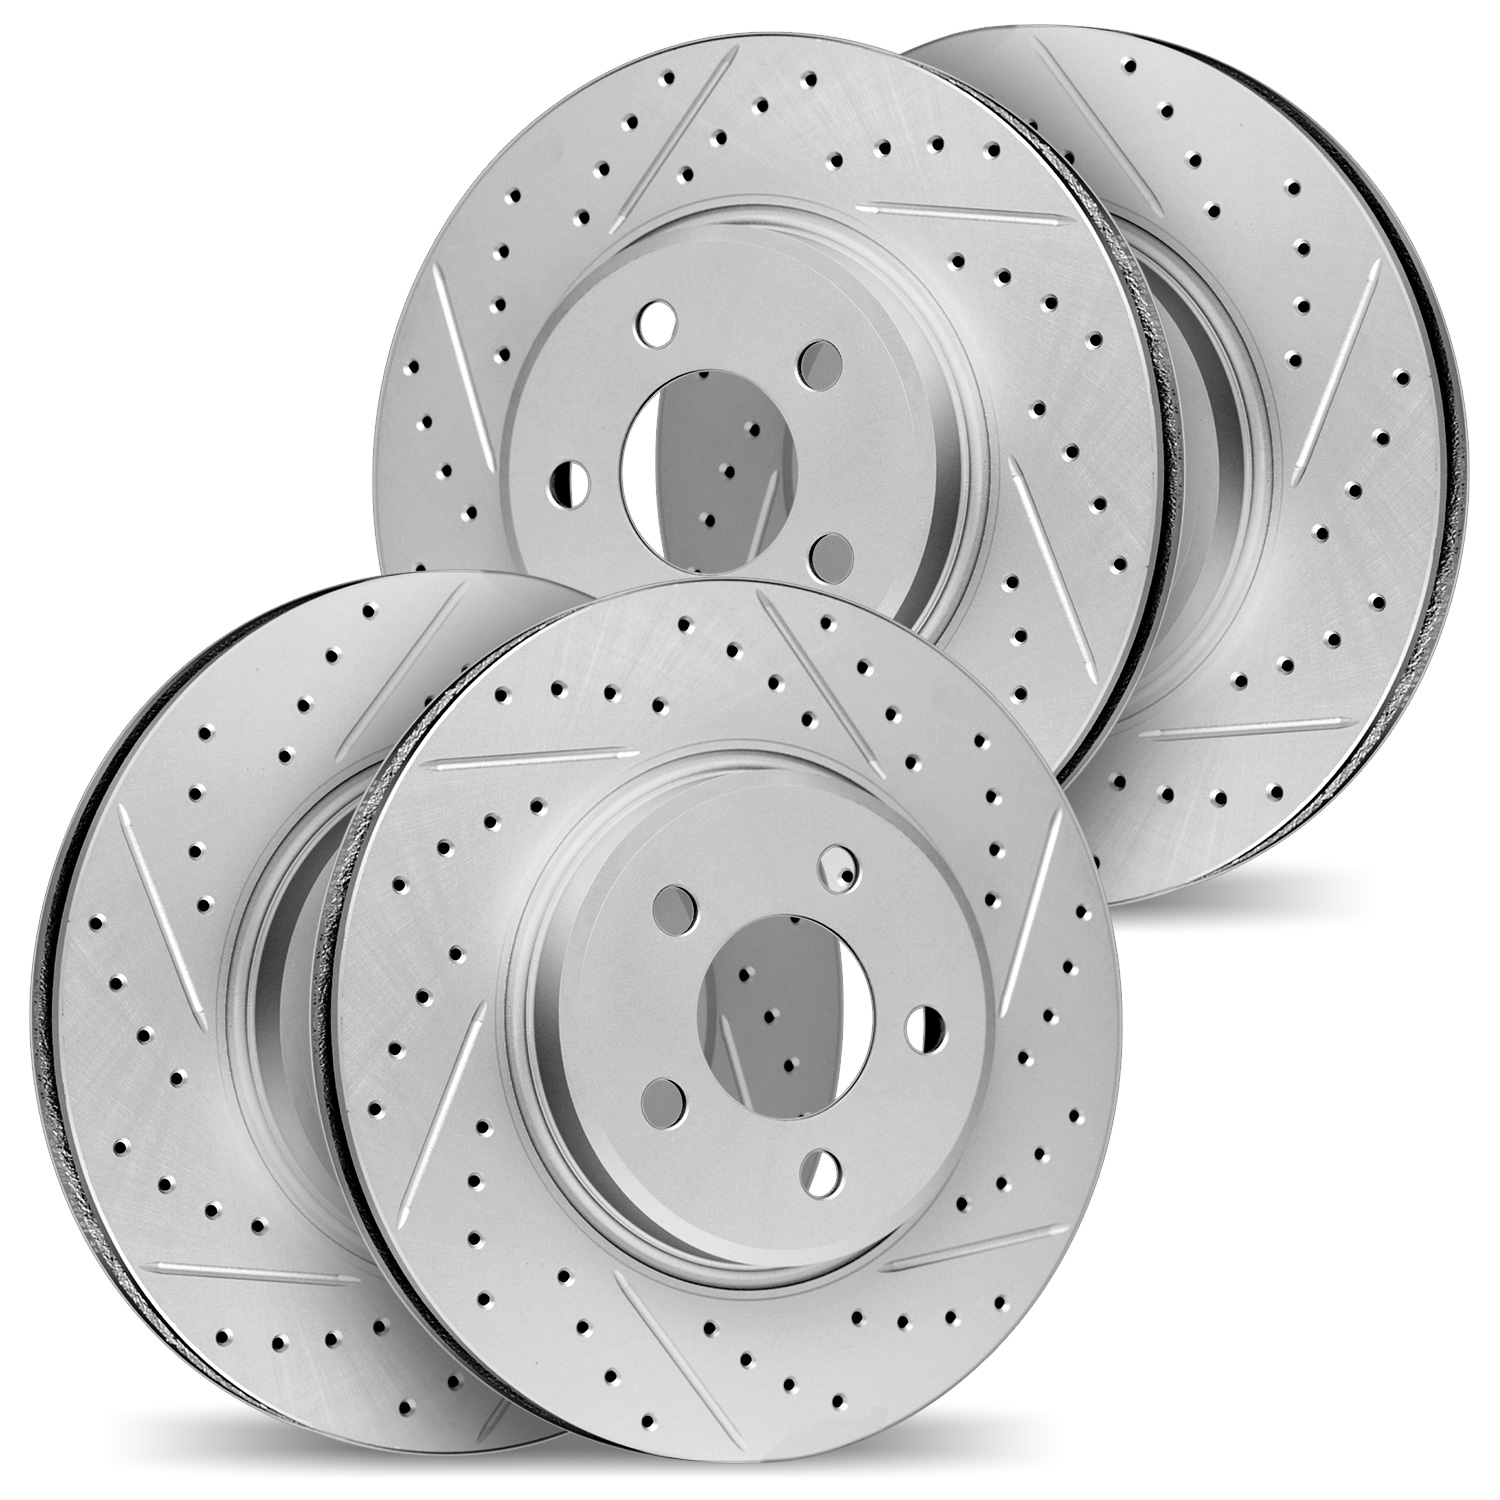 2004-76012 Geoperformance Drilled/Slotted Brake Rotors, 2008-2021 Lexus/Toyota/Scion, Position: Front and Rear